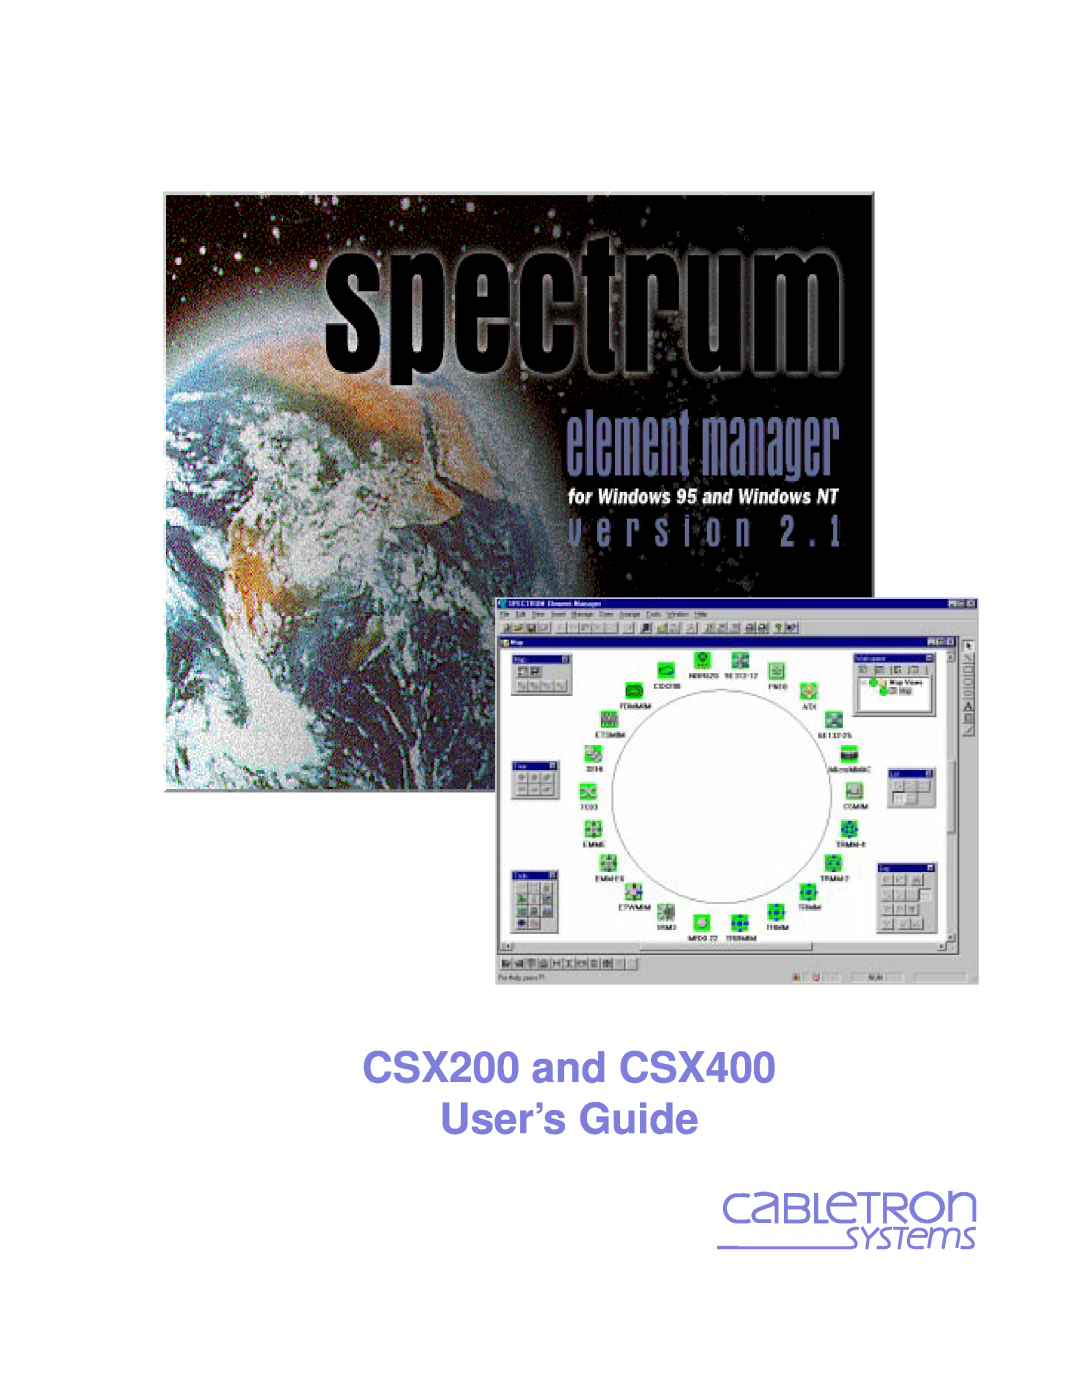 Cabletron Systems manual CSX200 and CSX400 User’s Guide 